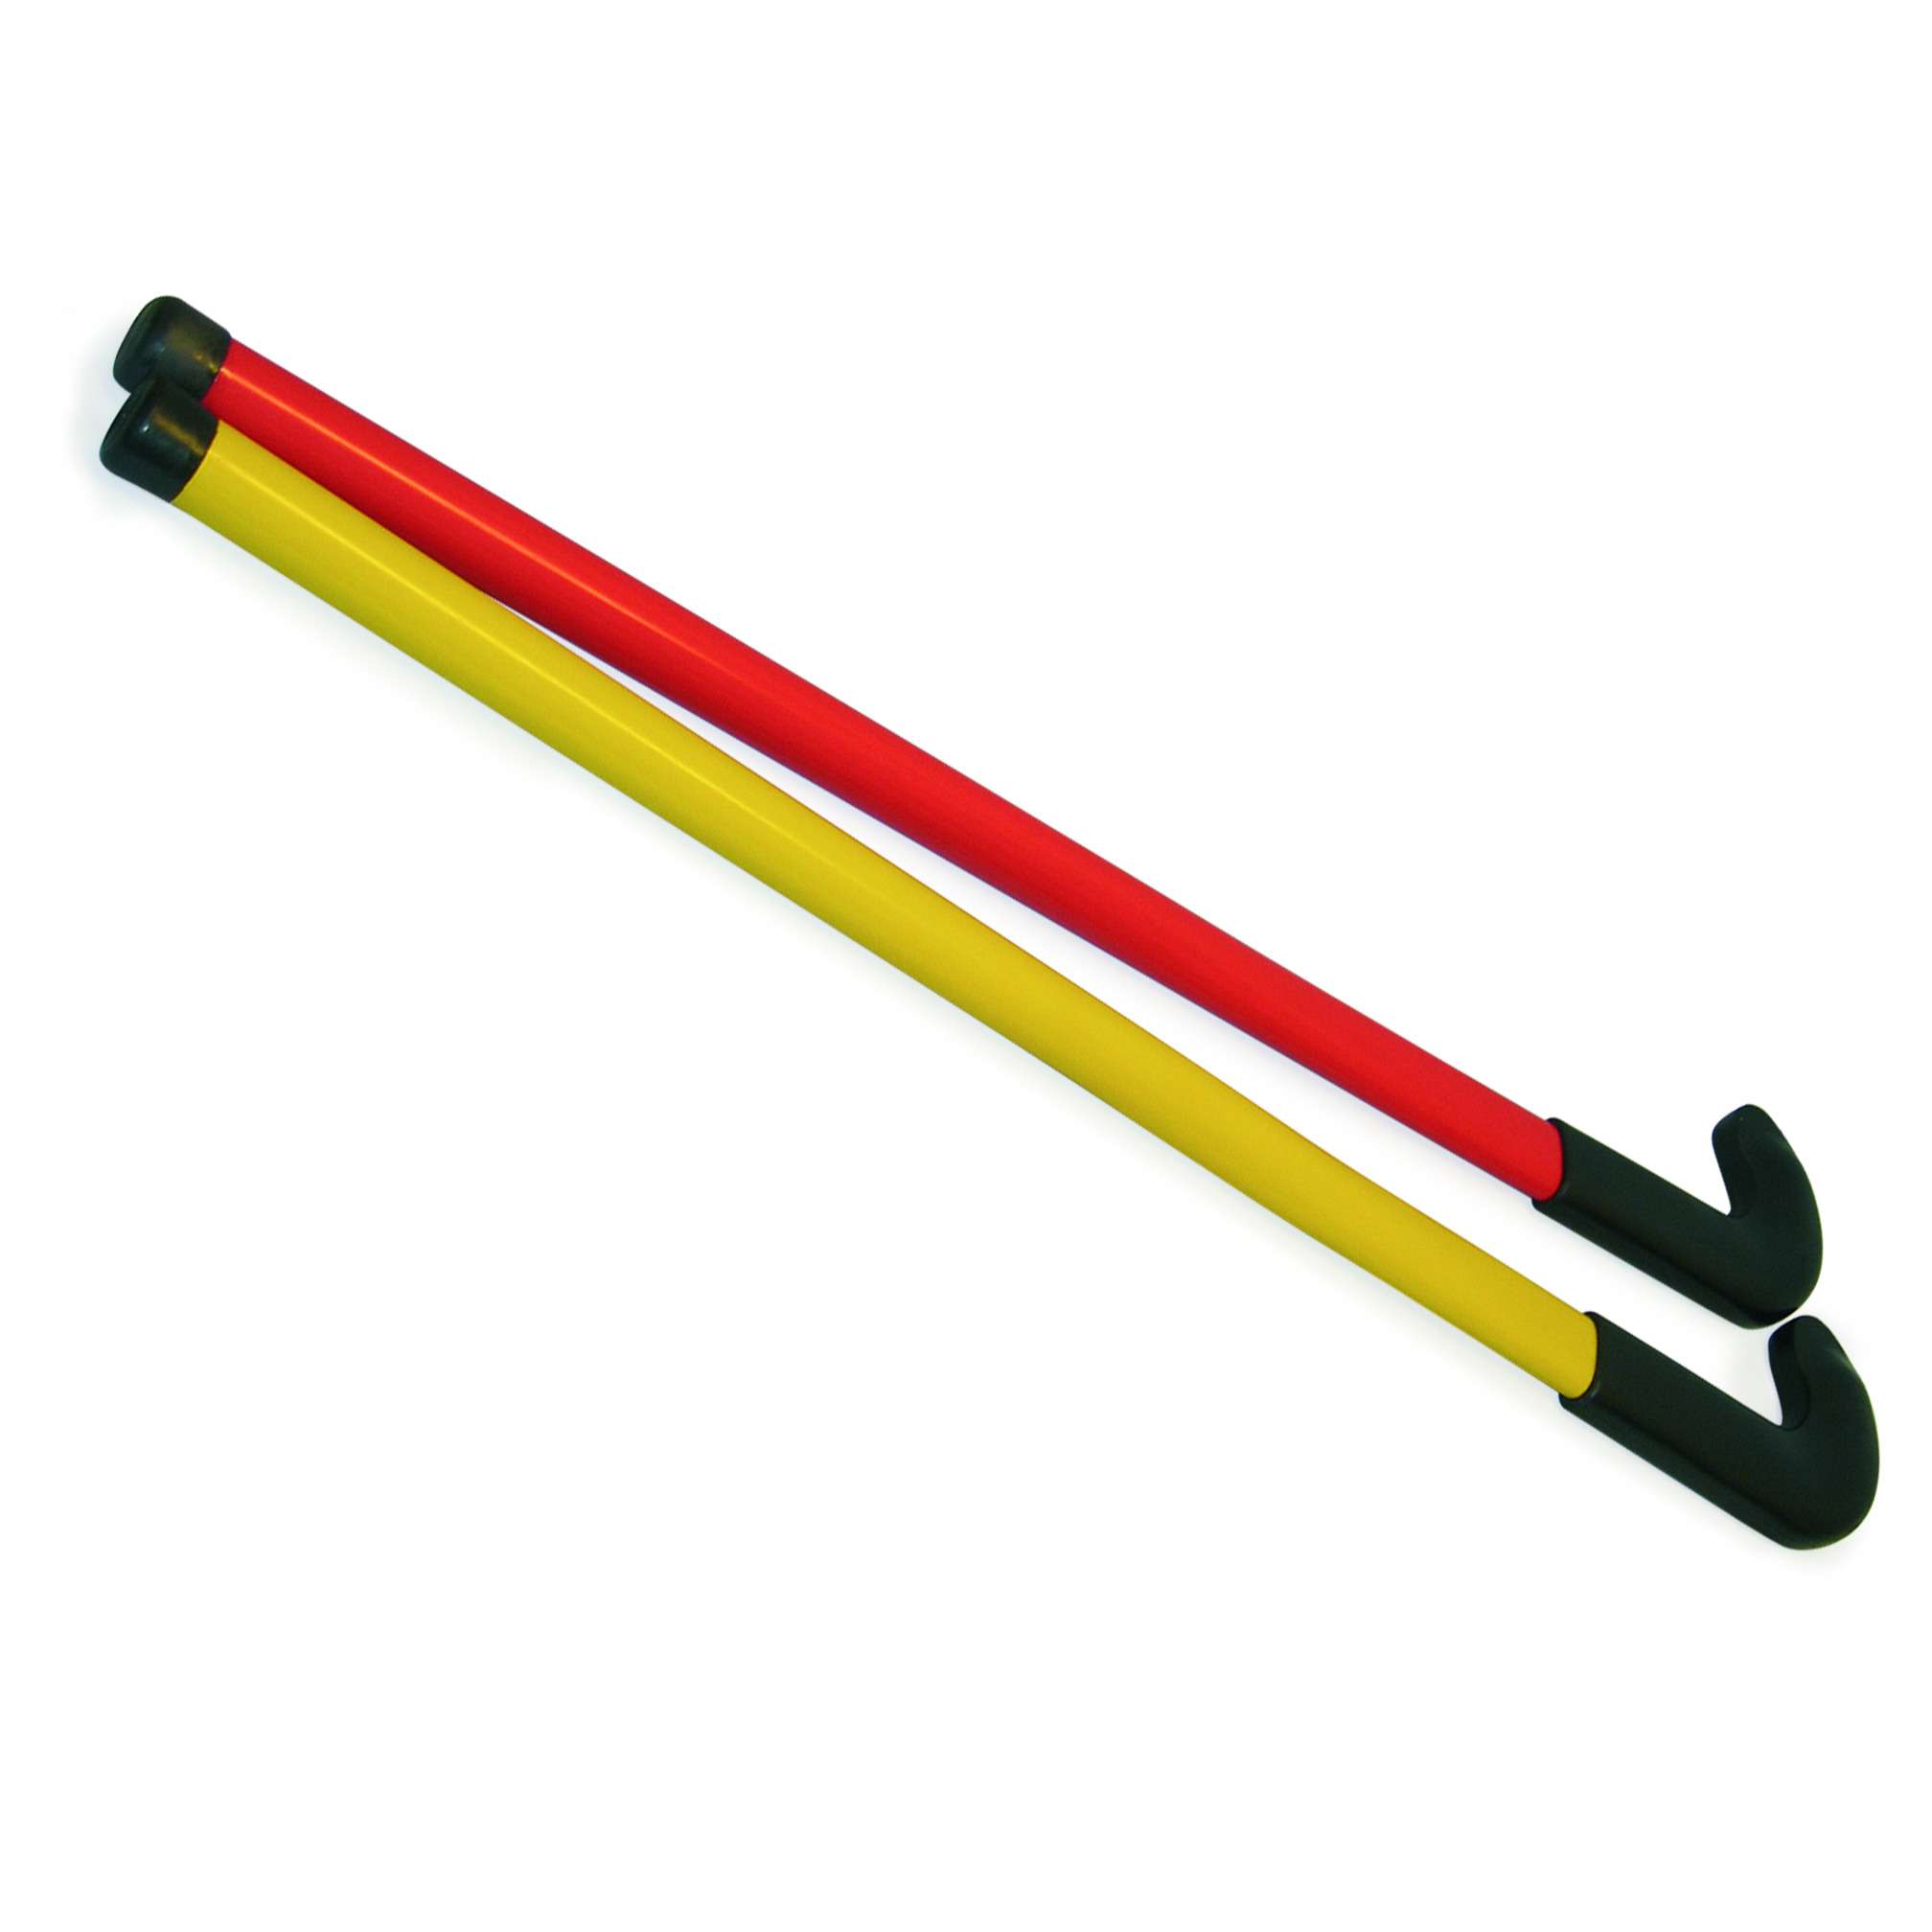 Plastic hockey stick with flat and convex side, yellow